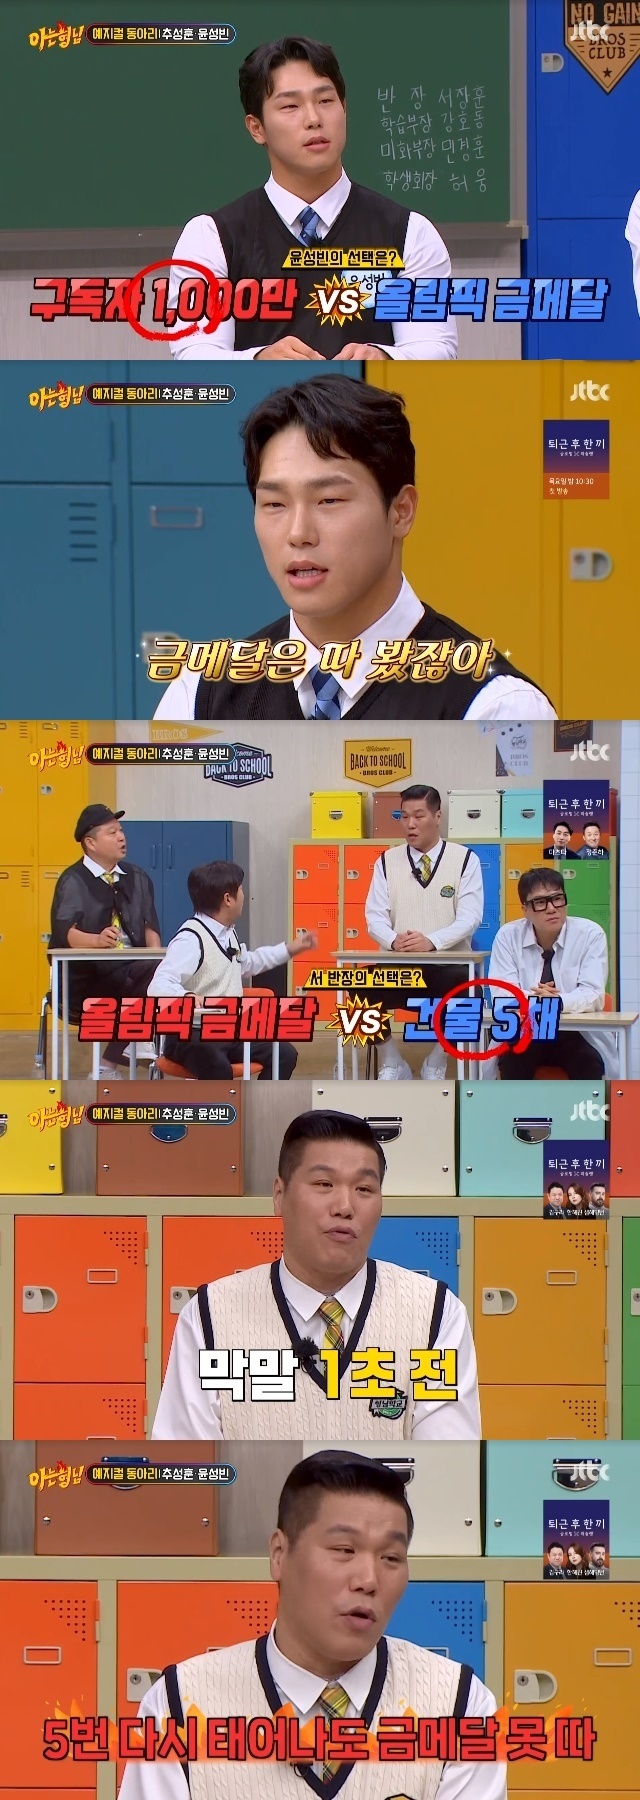 Former basketball player Seo Jang-hoon chose five Skyscrapers over Olympic medalsYoshihiro Akiyama and Yun Sungbin appeared as guests in the 376th JTBC entertainment show Knowing Bros (hereinafter referred to as Brother), which aired on March 25th.On this day, Yun Sungbin chose the latter without worrying when the Olympic Gold Medal was awarded as a balance game.He said that Seo Jang-hoon and Kang Ho-dong, who are former athletes, wondered, The athlete thinks like that and I do not agree.My brothers asked a similar question to Seo Jang-hoon in Yun Sungbins answer.Which of the five Olympic gold medals versus Skyscraper would you choose? Seo Jang-hoon replied, Five Skyscrapers in 0.1 seconds.Seo Jang-hoon said, Im sorry, but basketball can not win the gold medal in the Olympics even if it is reborn five times in the future.He did not care about Kang Ho-dongs emotional rebuttal, You have to dream!Kang Ho-dong then gave another condition, If you jump over Michael Jordan, then Seo Jang-hoon gave up Skyscraper and laughed.